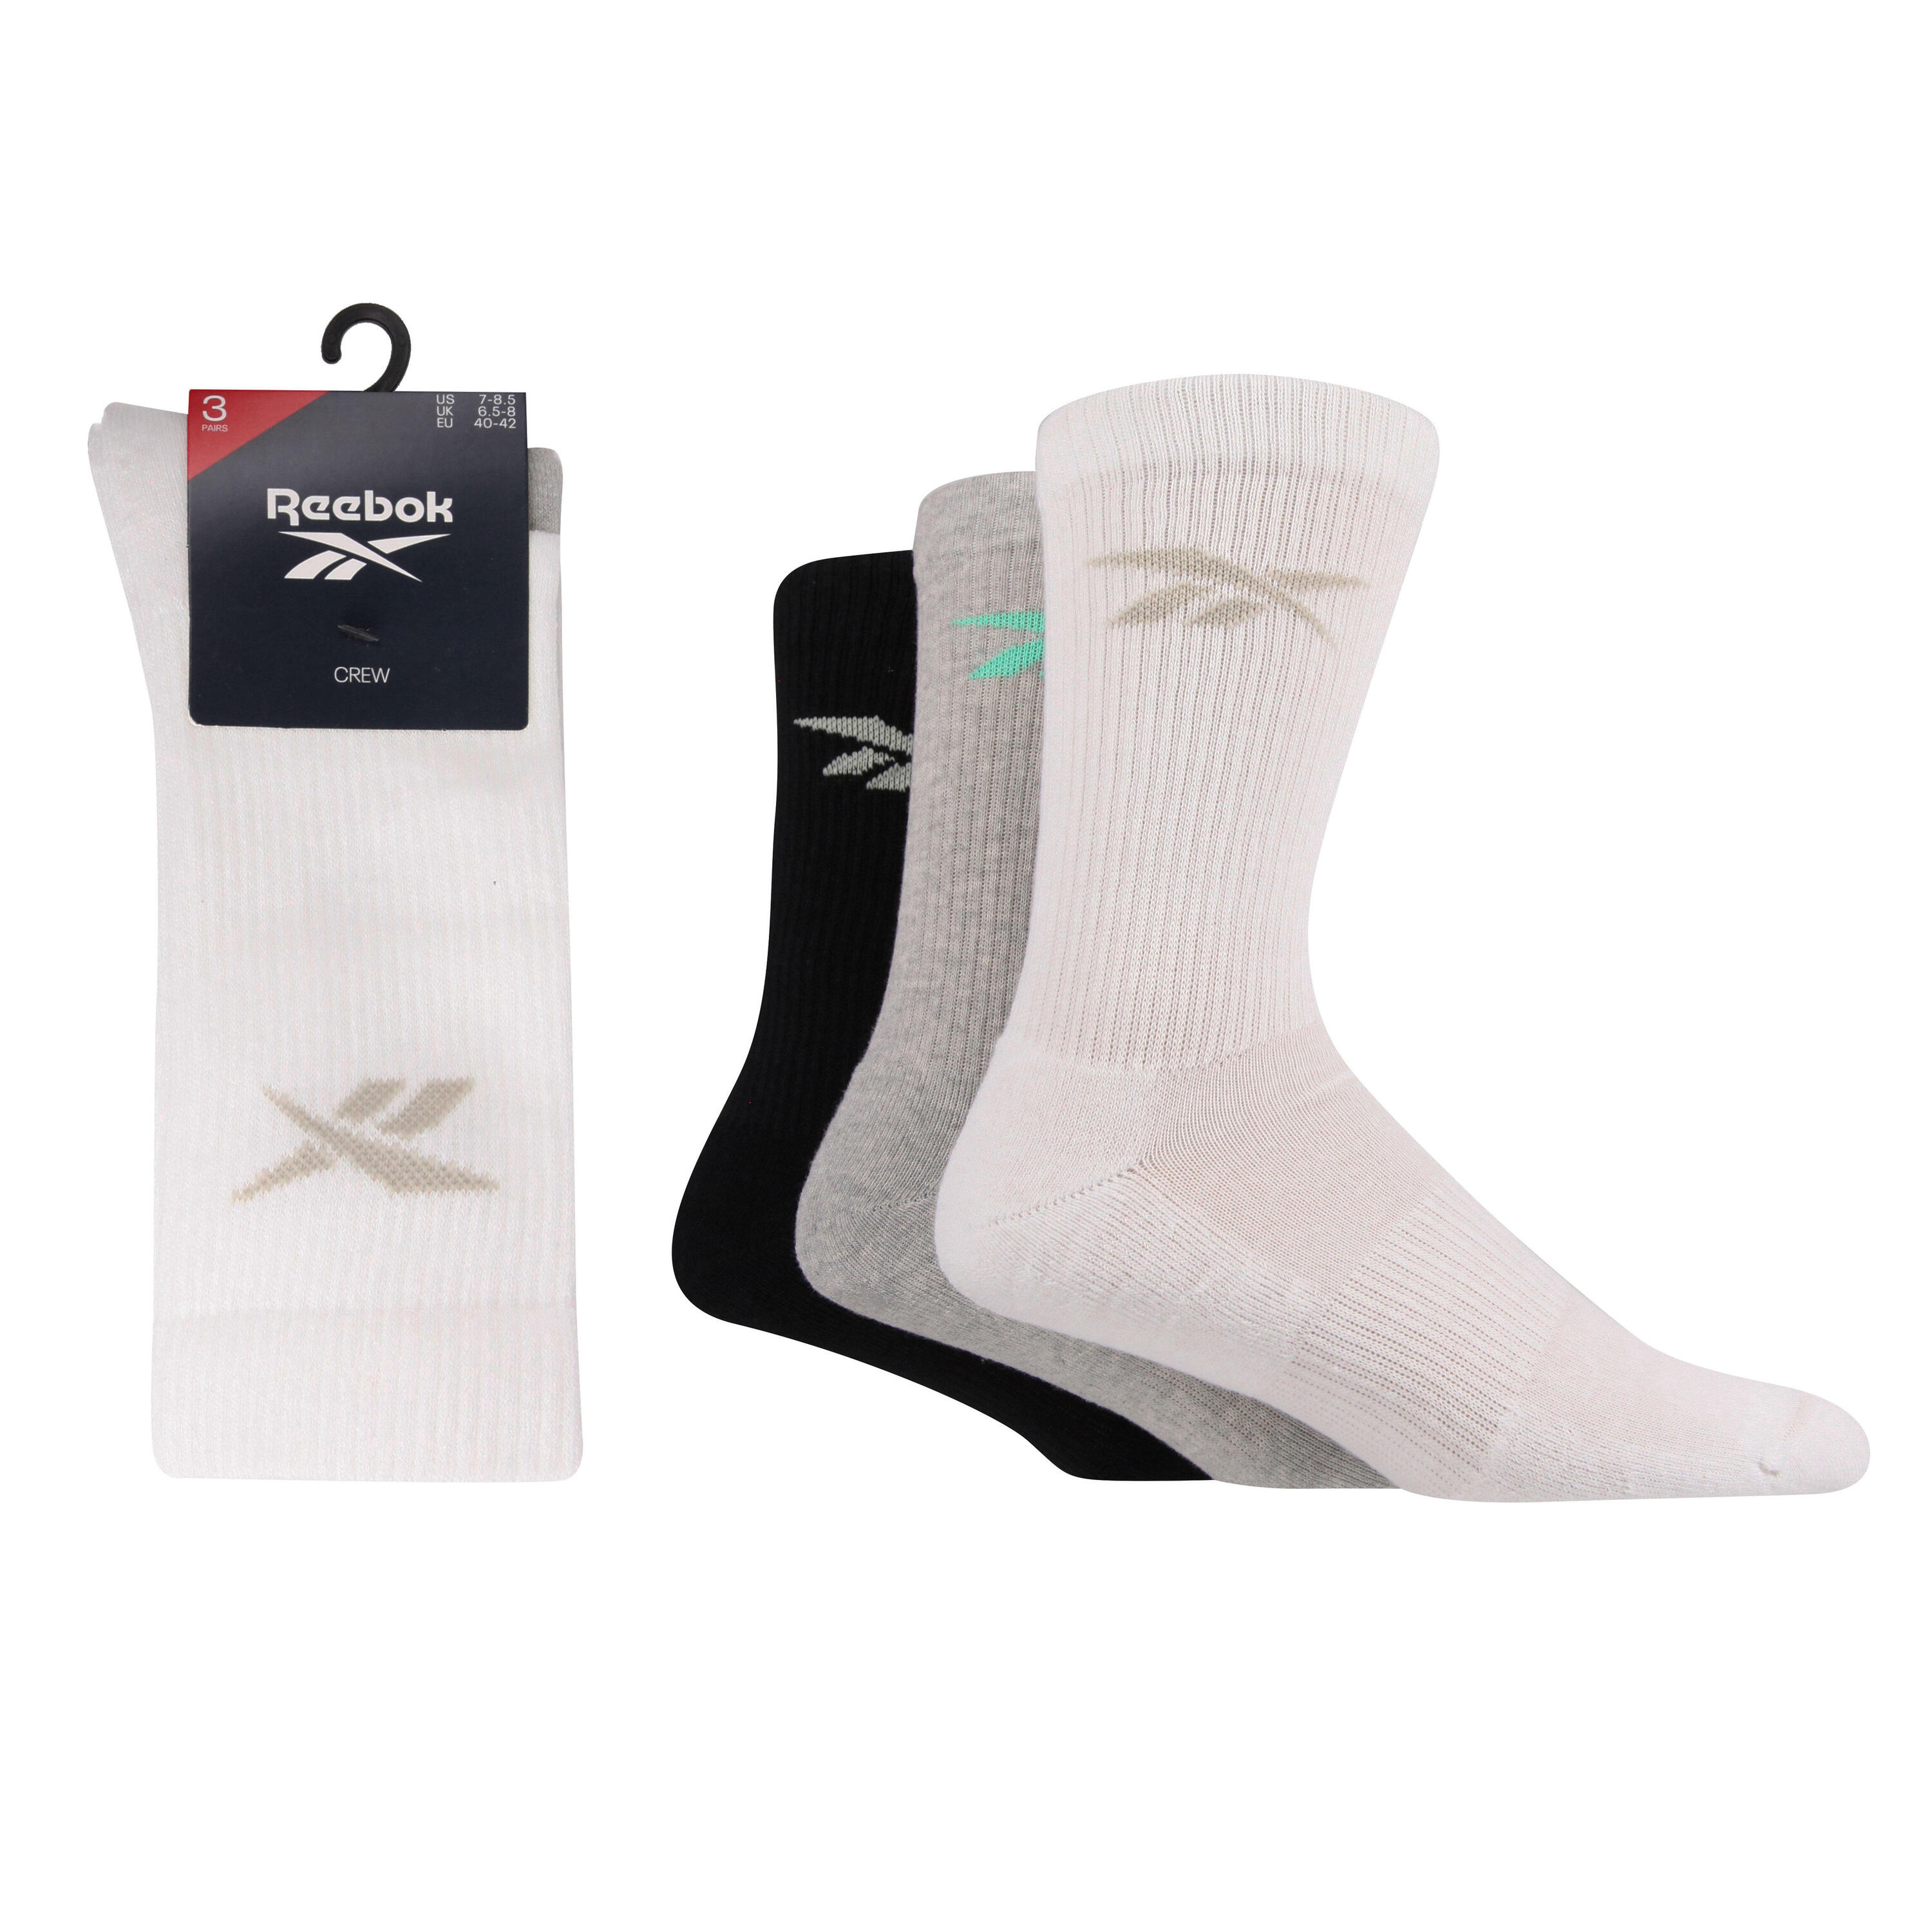 REEBOK 3 Pack Crew Length Sport Socks With Cushion Sole, Arch Support And Seamless Toes